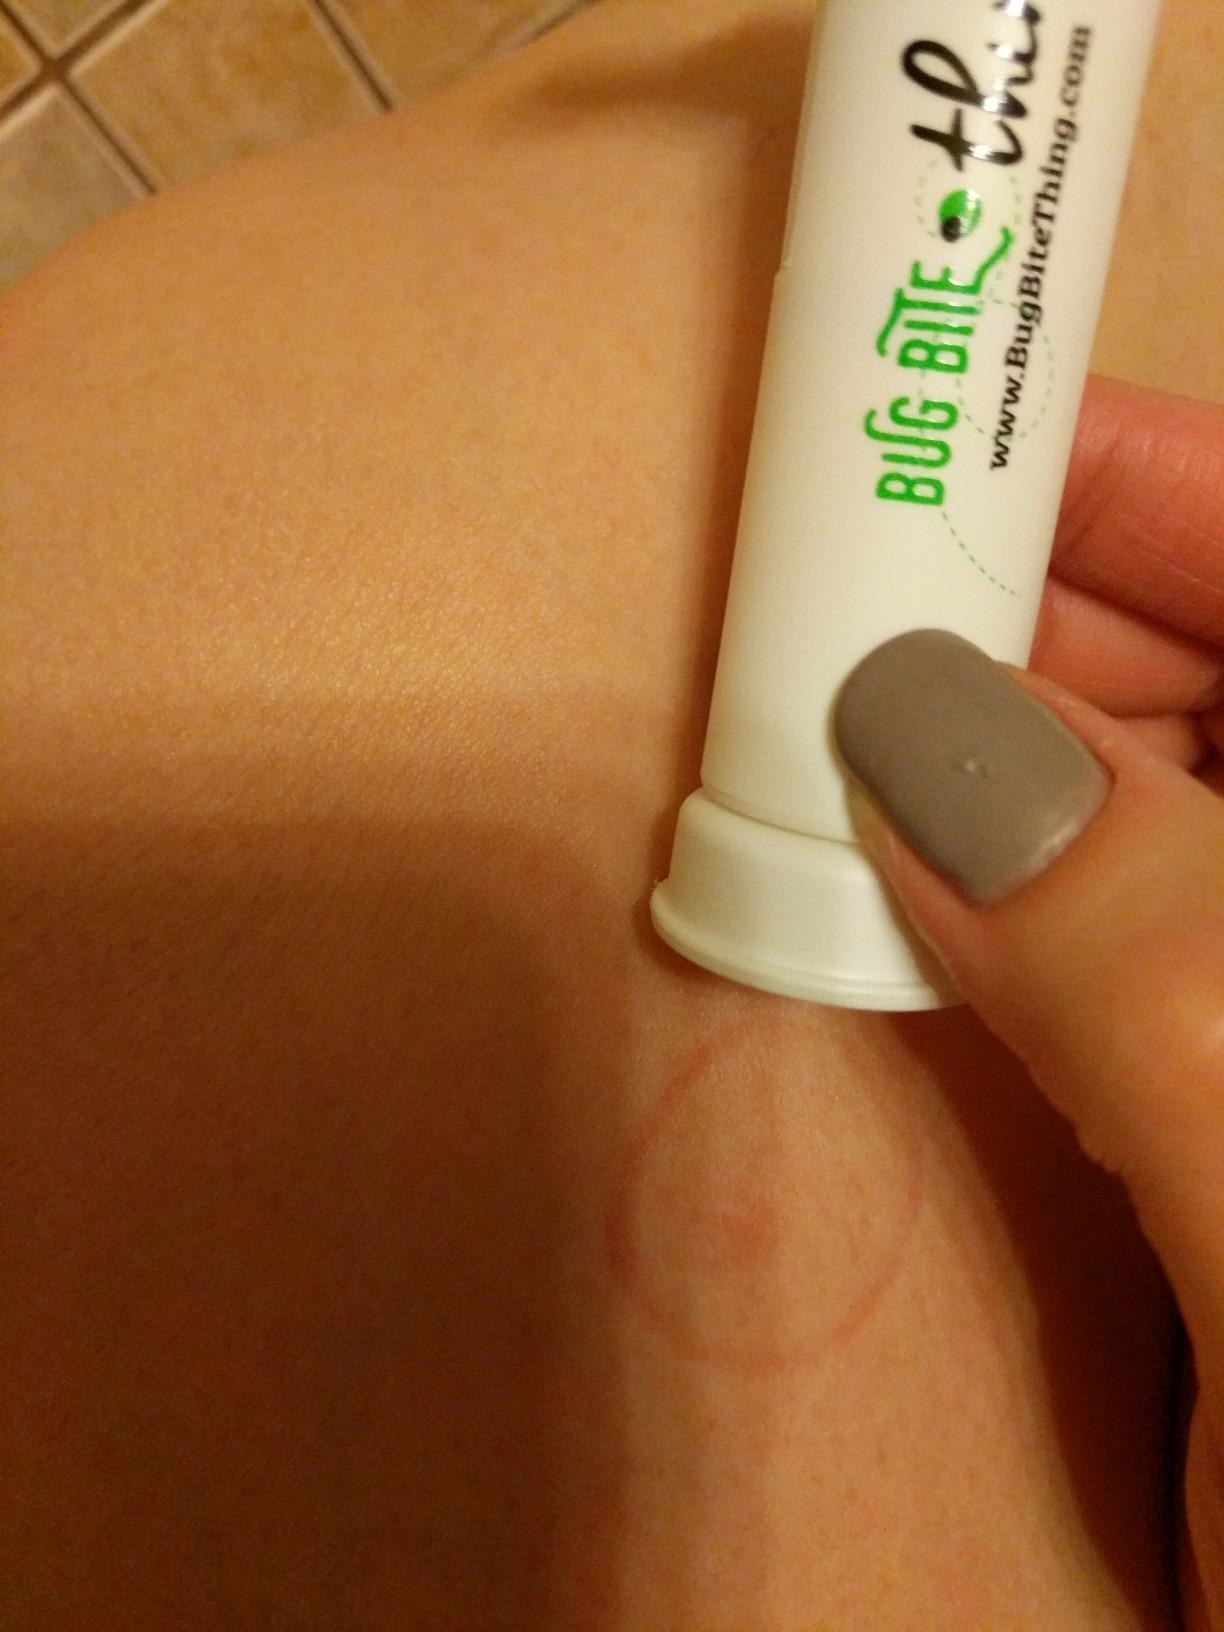 a woman's healed skin after using the bug bite thing